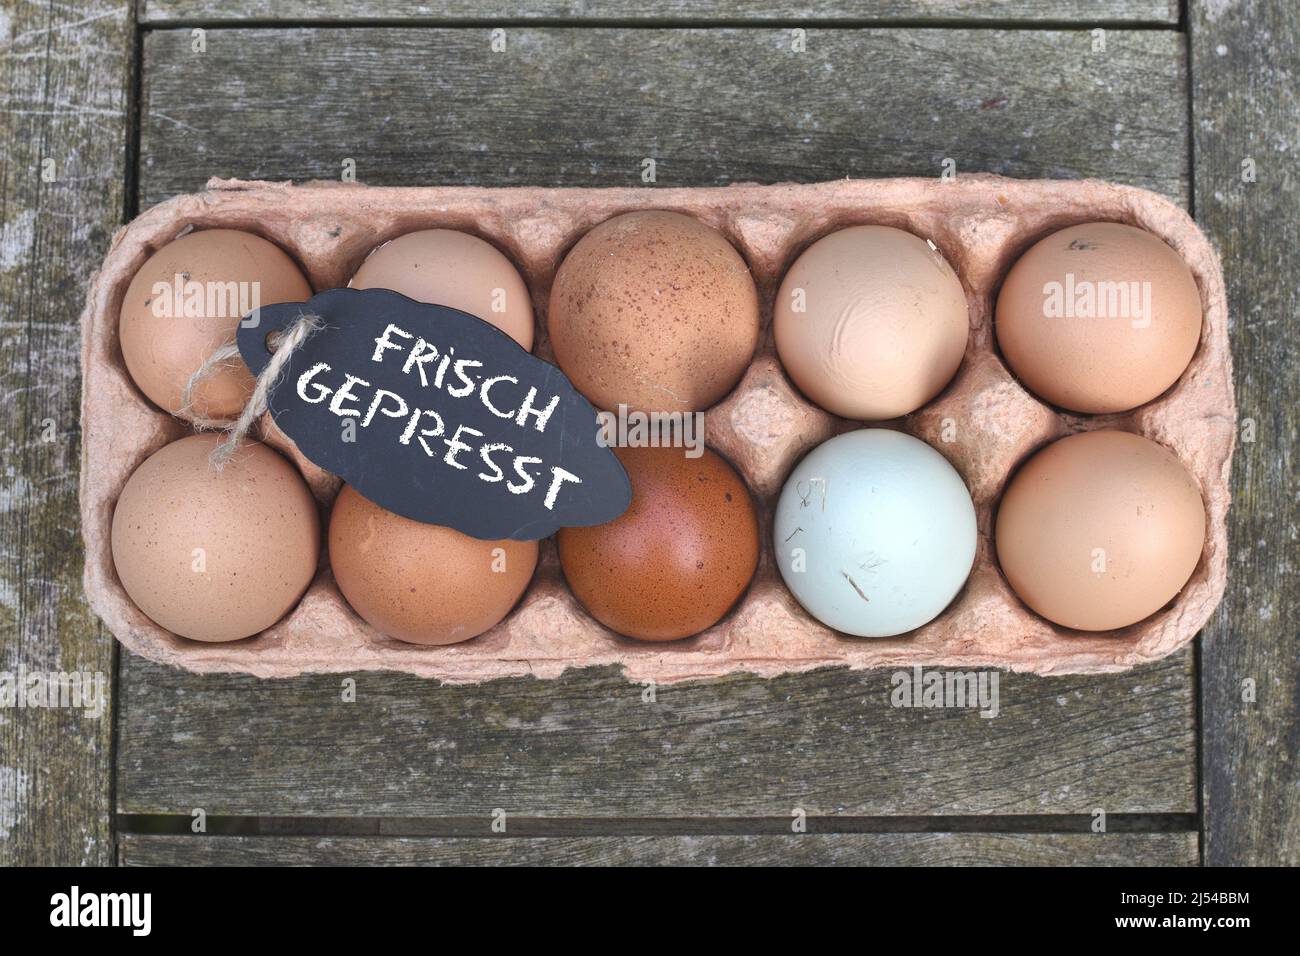 chalkboard with the inscription 'Frisch gepresst' on chicken eggs in the egg carton, Germany Stock Photo